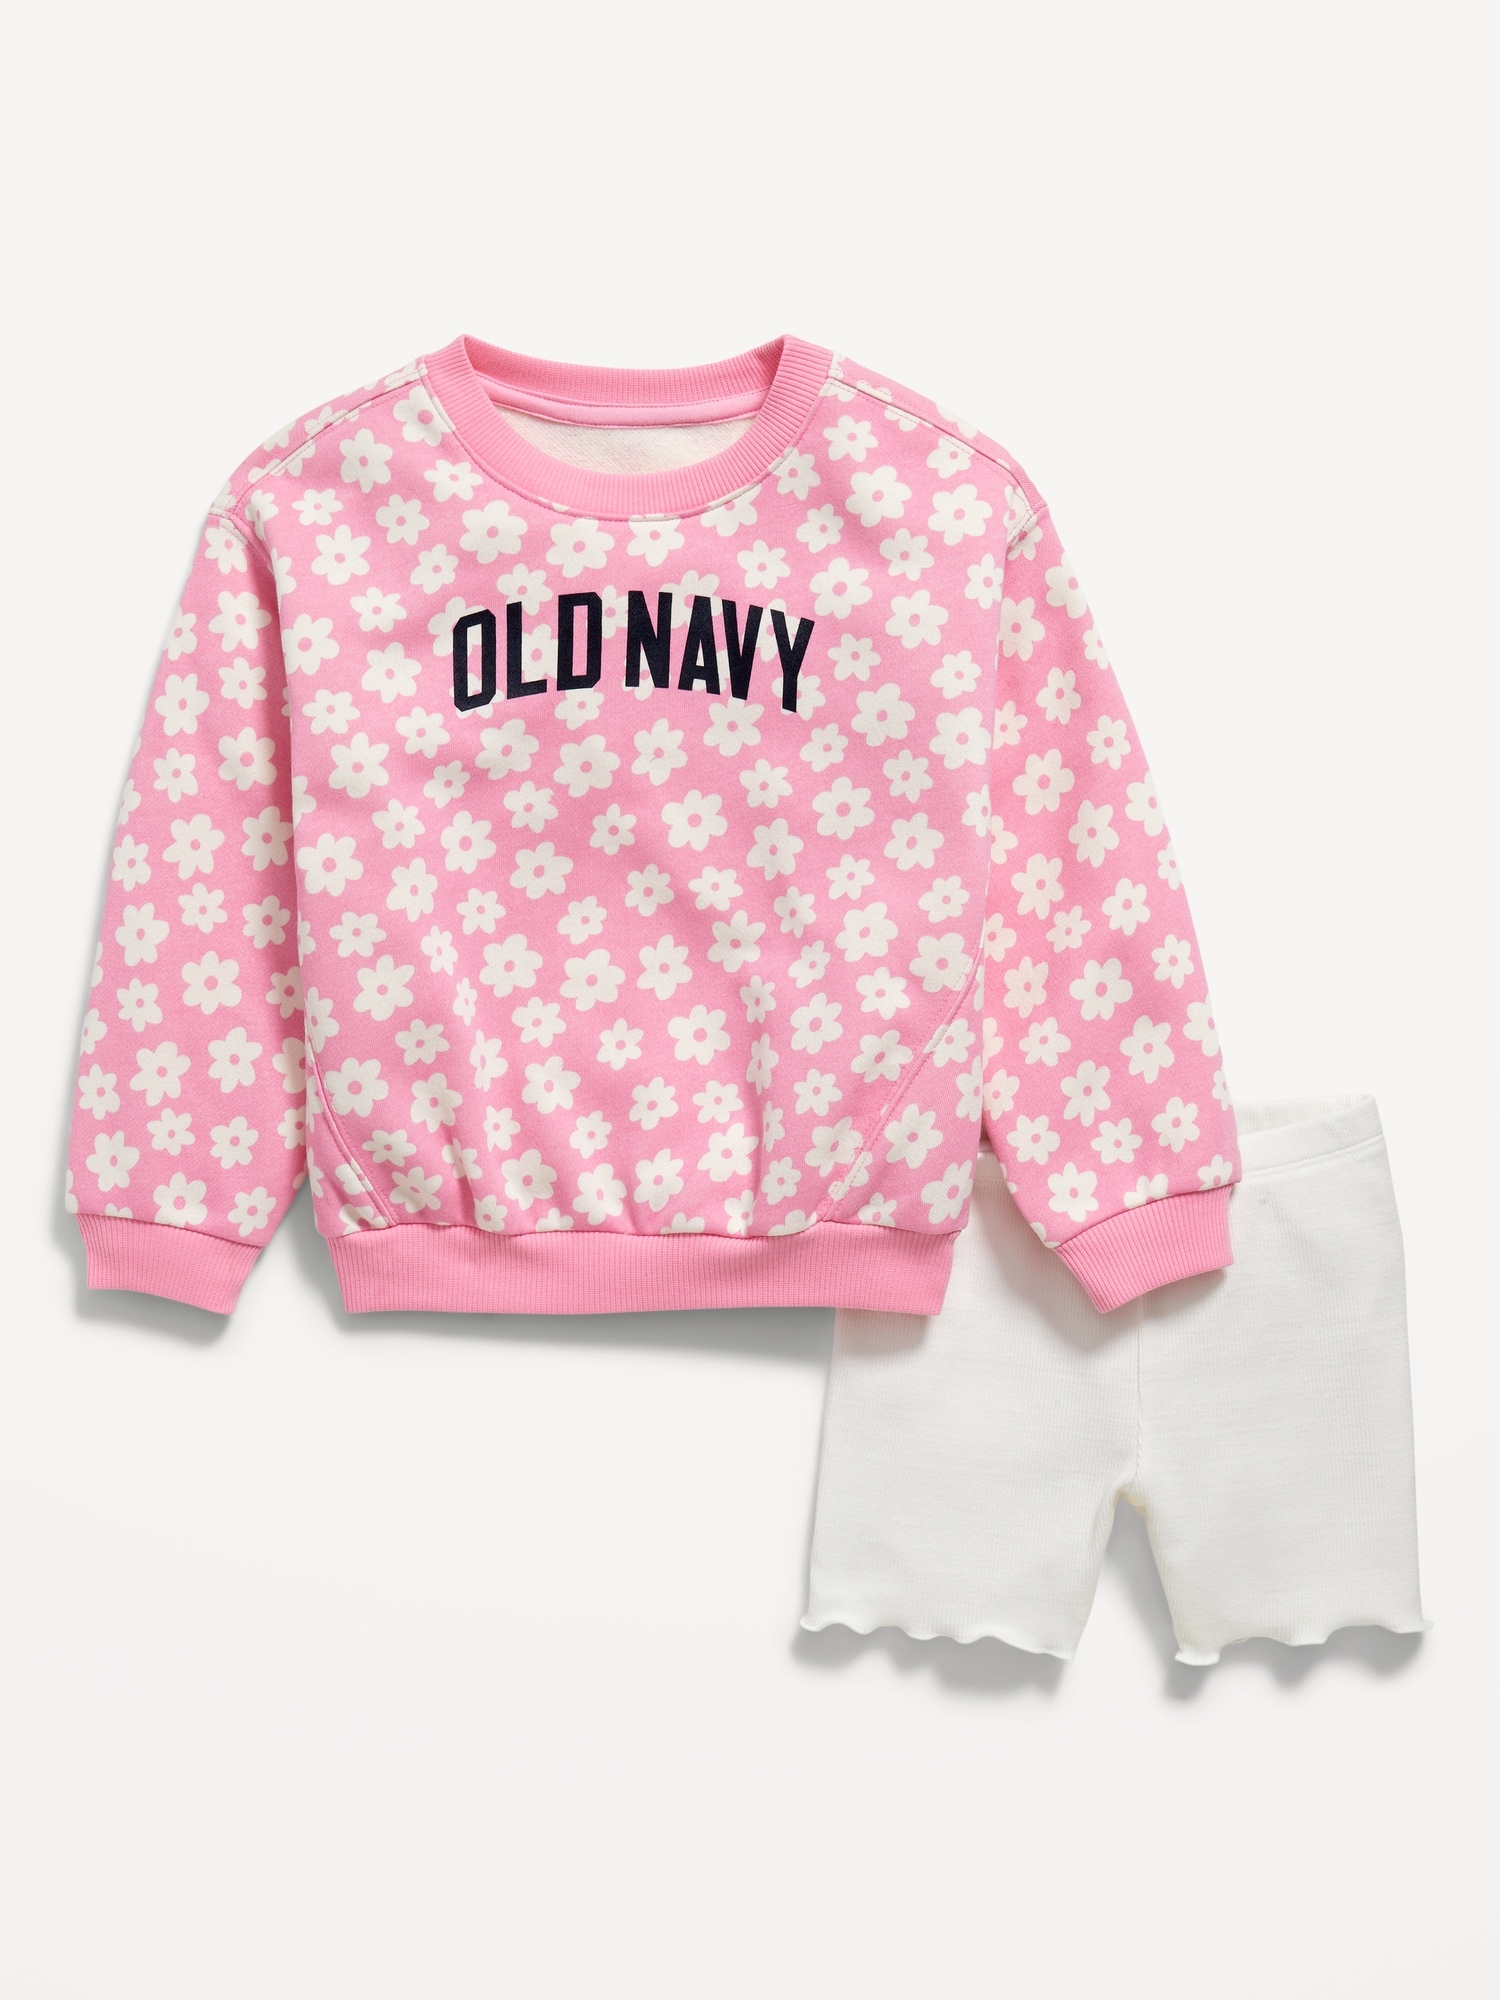 Old Navy Blue Sports & Outdoors Apparel Items for Girls